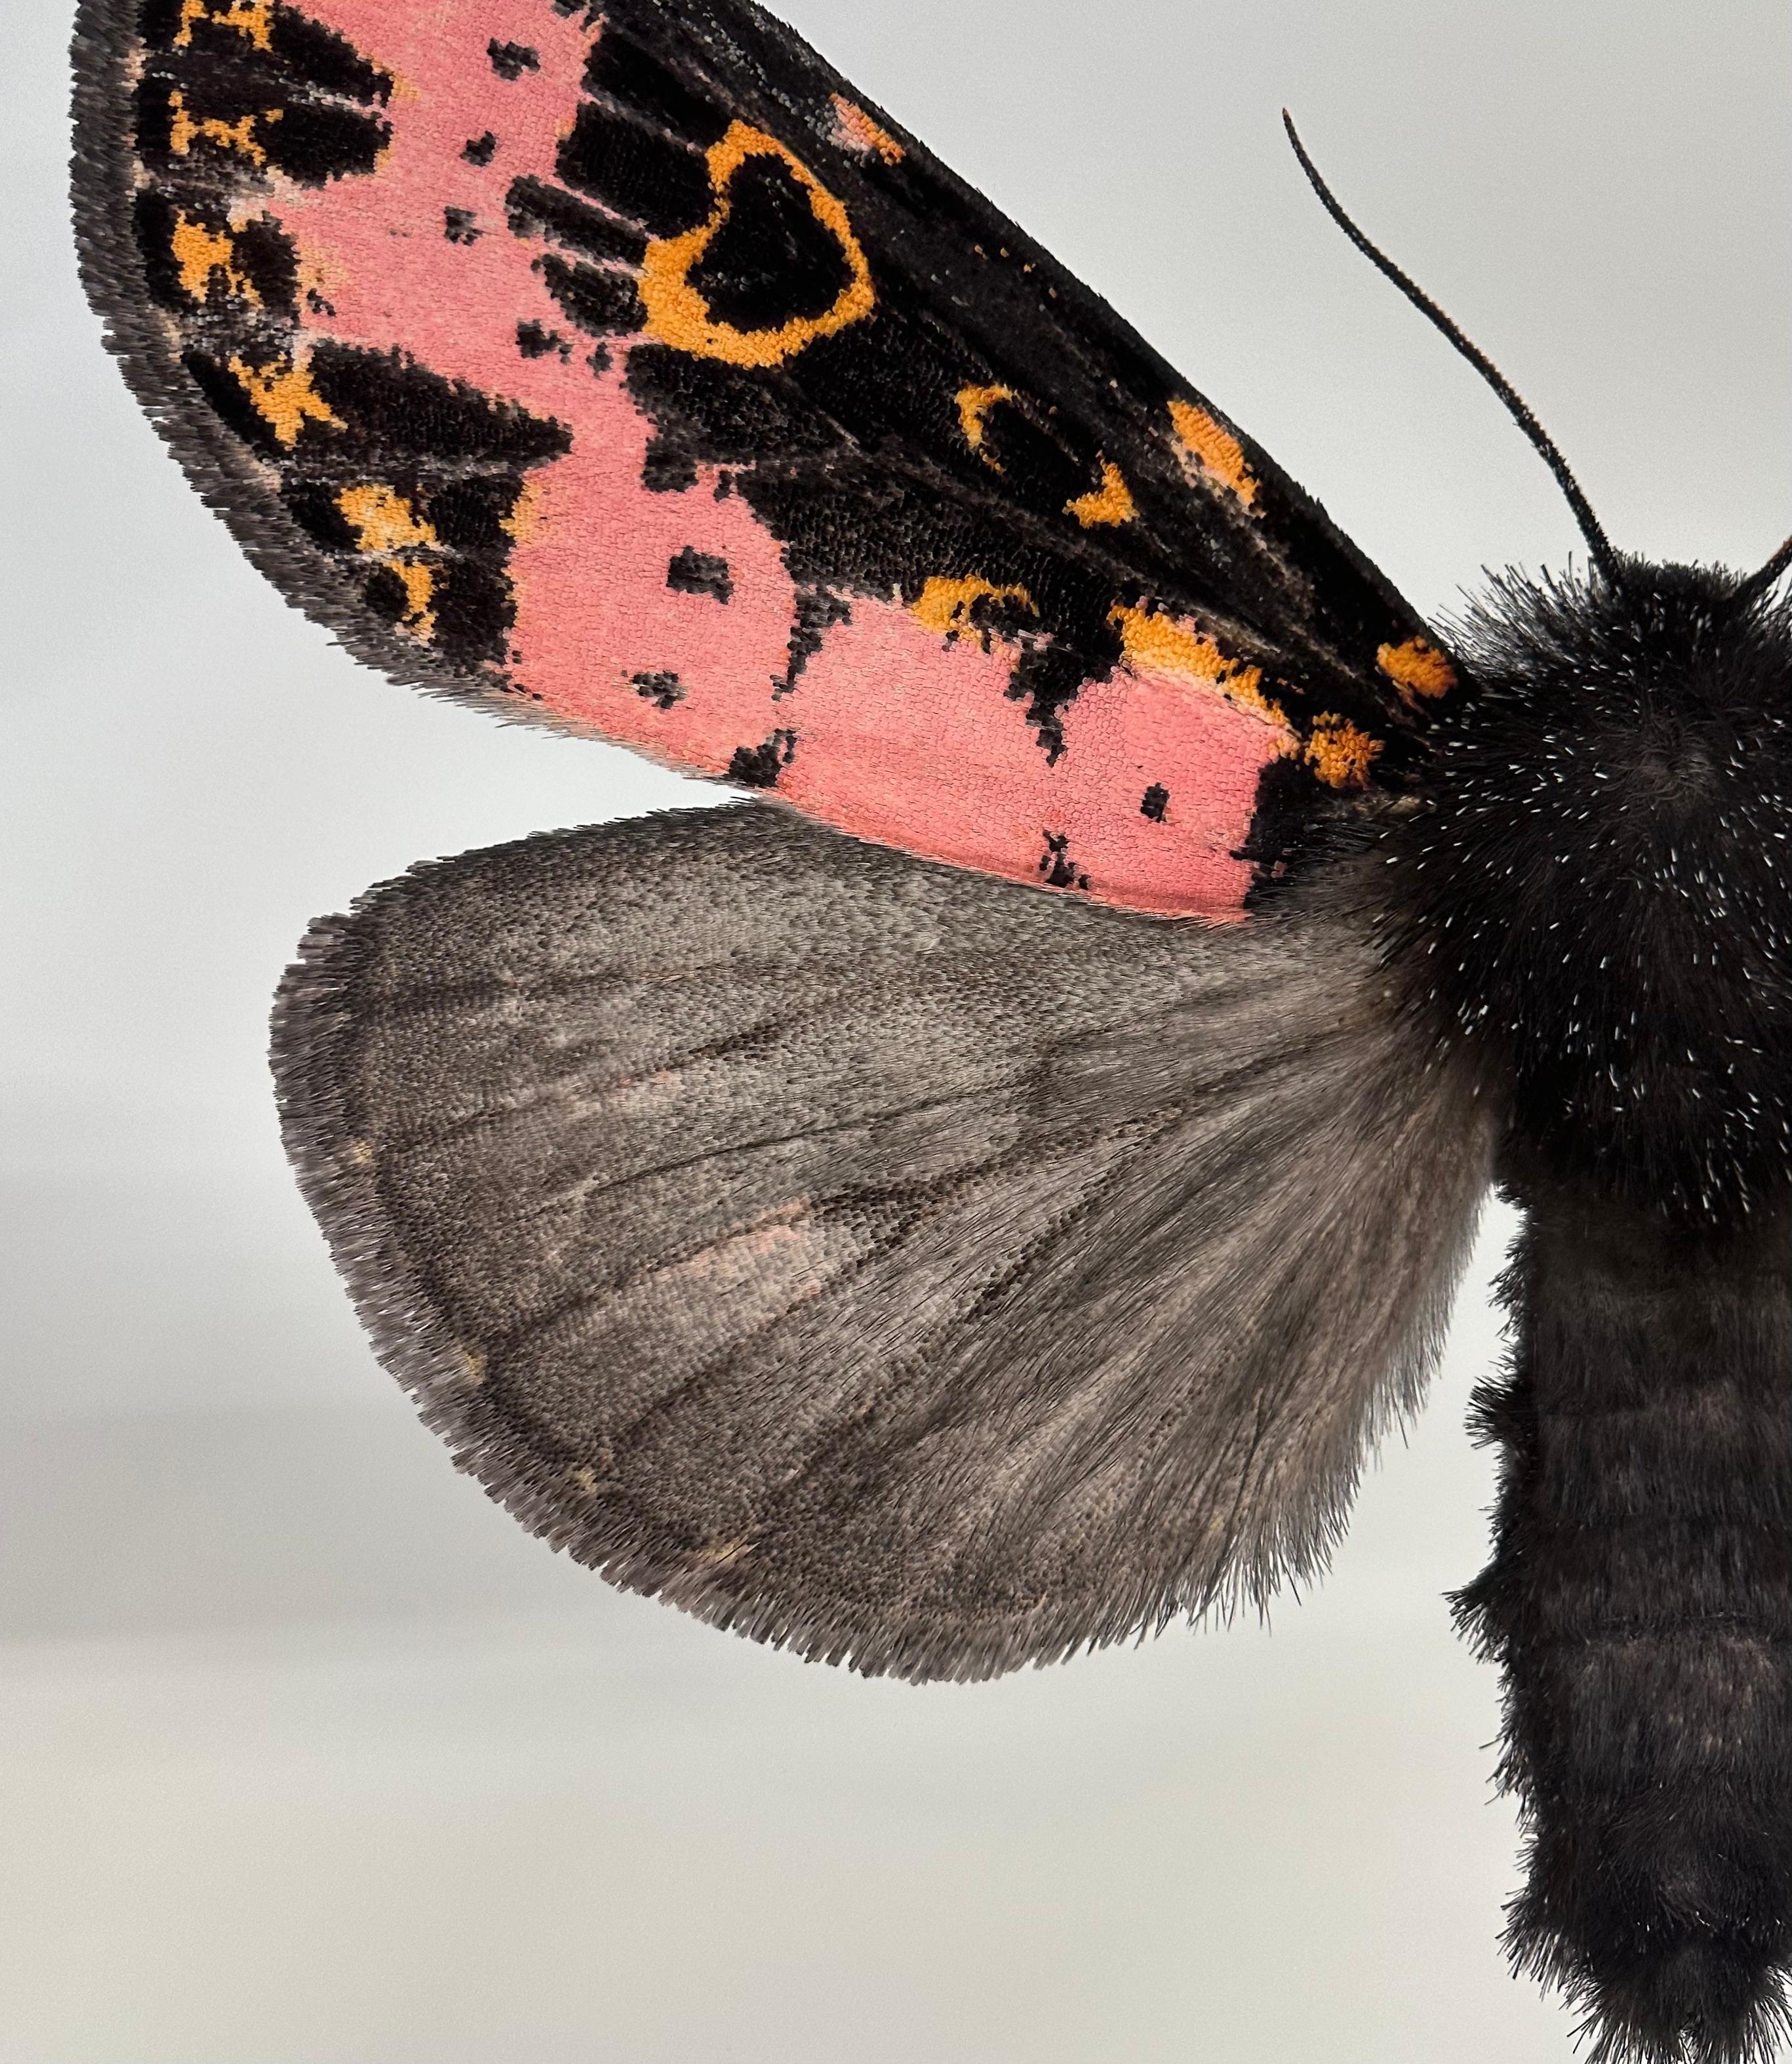 In this hyper-detailed archival pigment print on watercolor paper, a moth with pink, orange and black markings on its upper wings is dramatic against a solid white background. 

Price shown is the unframed price. Please inquire with the gallery for